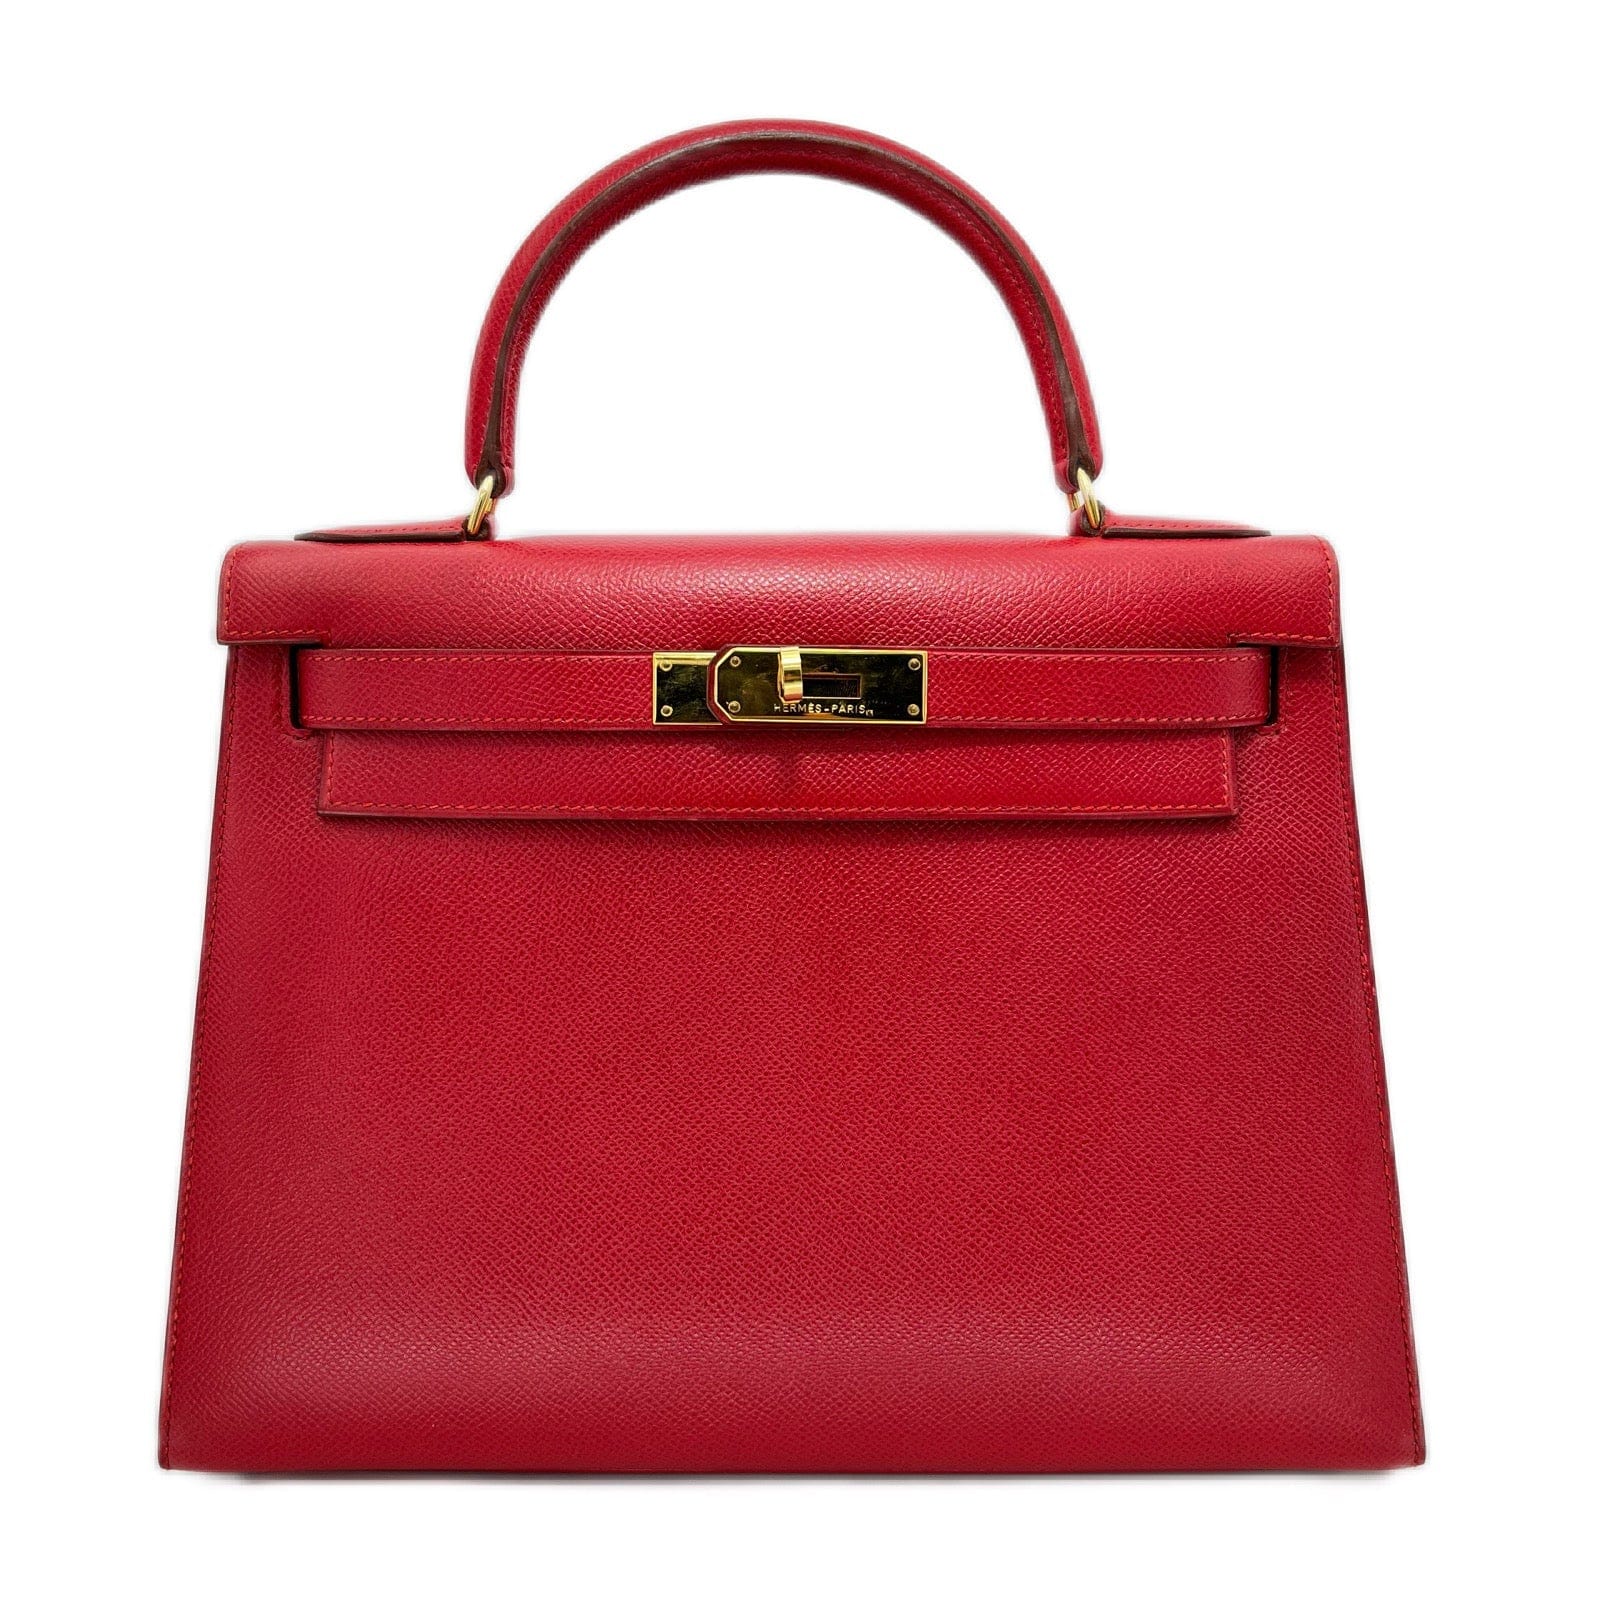 Chanel HERMES KELLY 28 SELLIER ROUGE VIF COUCHEVEL HAND BAG 〇U 90214030